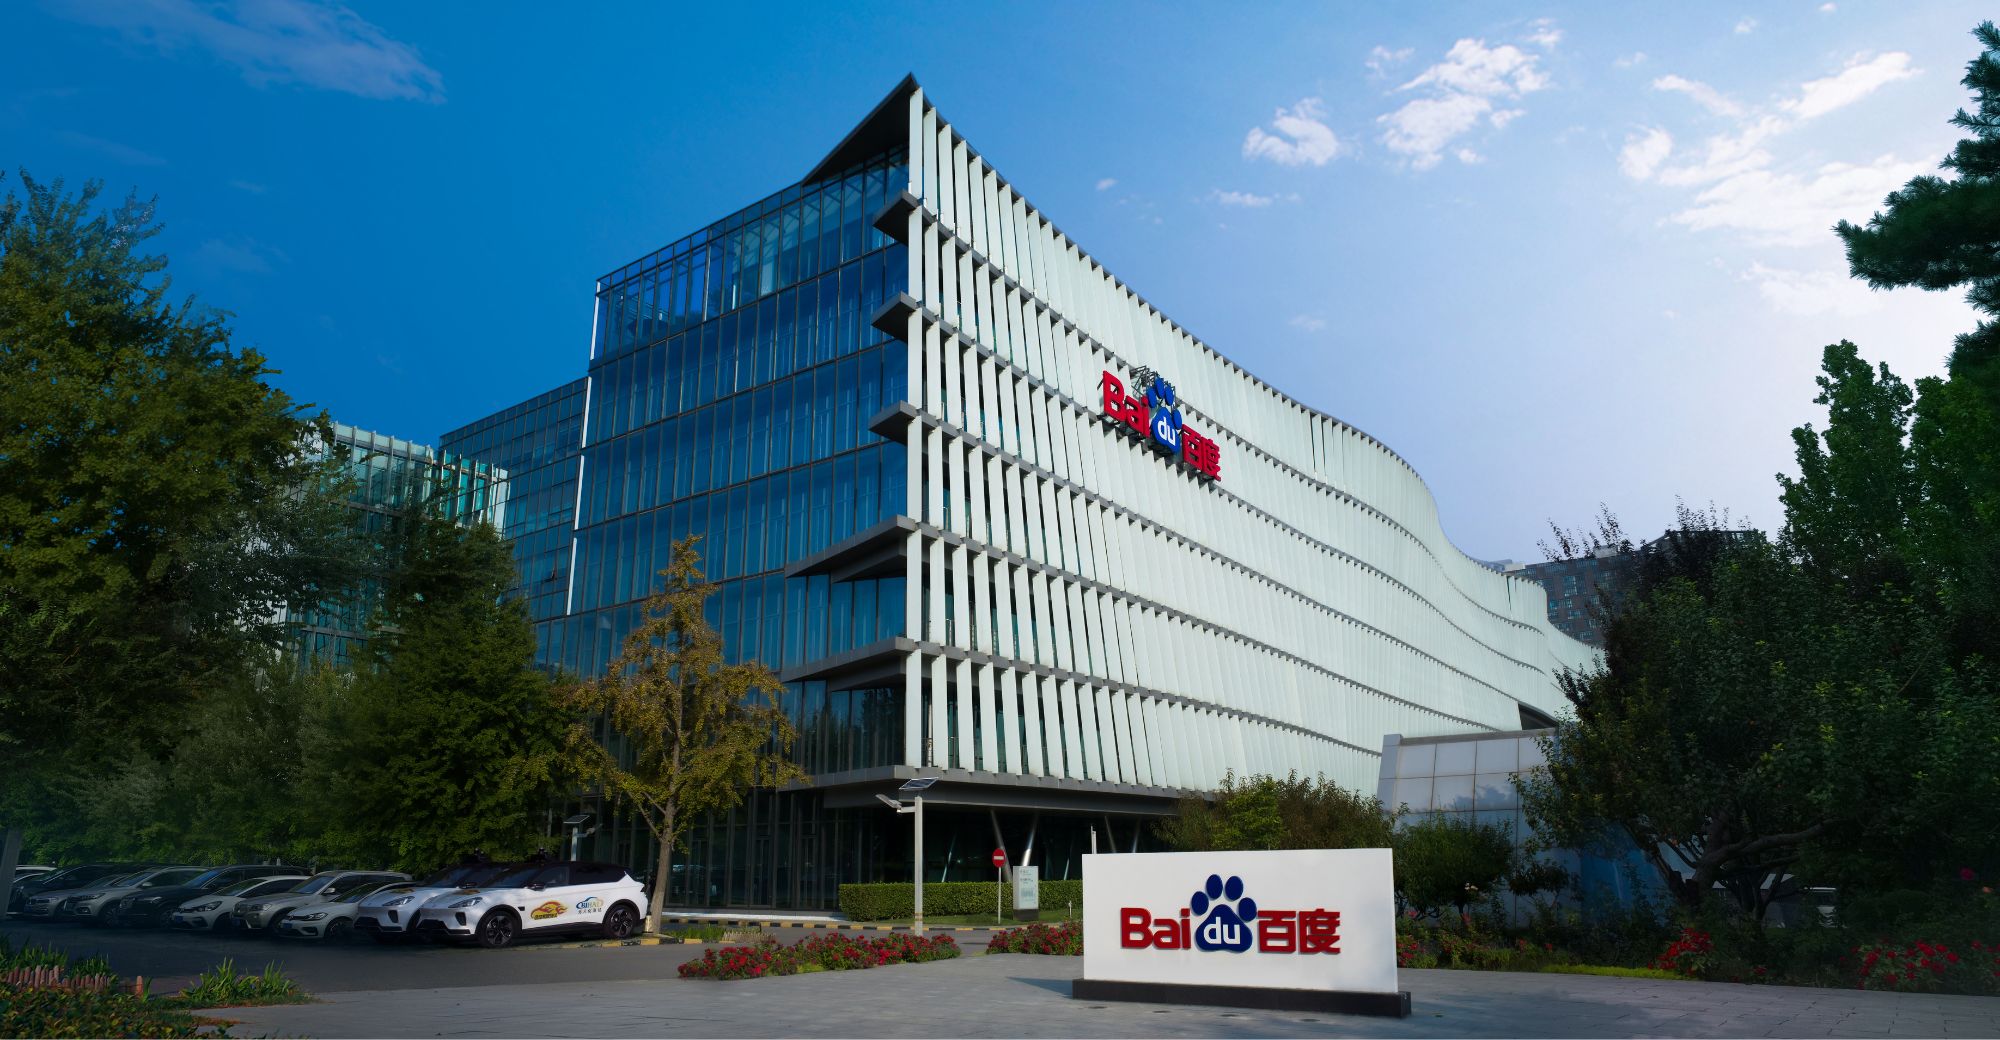 Facts vs. Rumors: The Misinterpreted Military Connection of Baidu